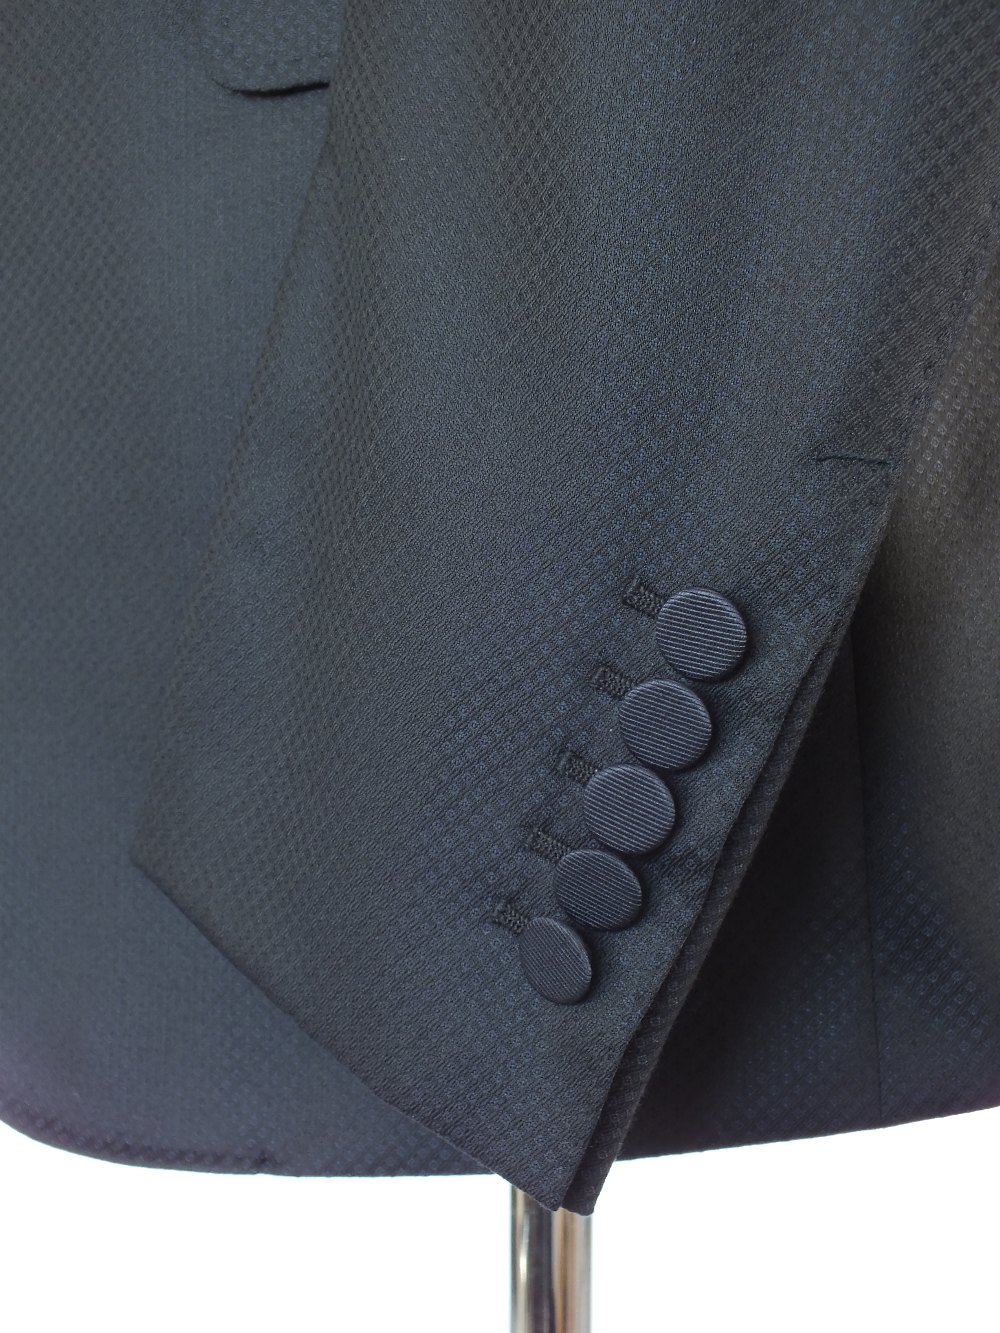 A Gucci dinner suit, navy, textured weave, silk twill lower lapel and detailing, single vent, - Image 5 of 6